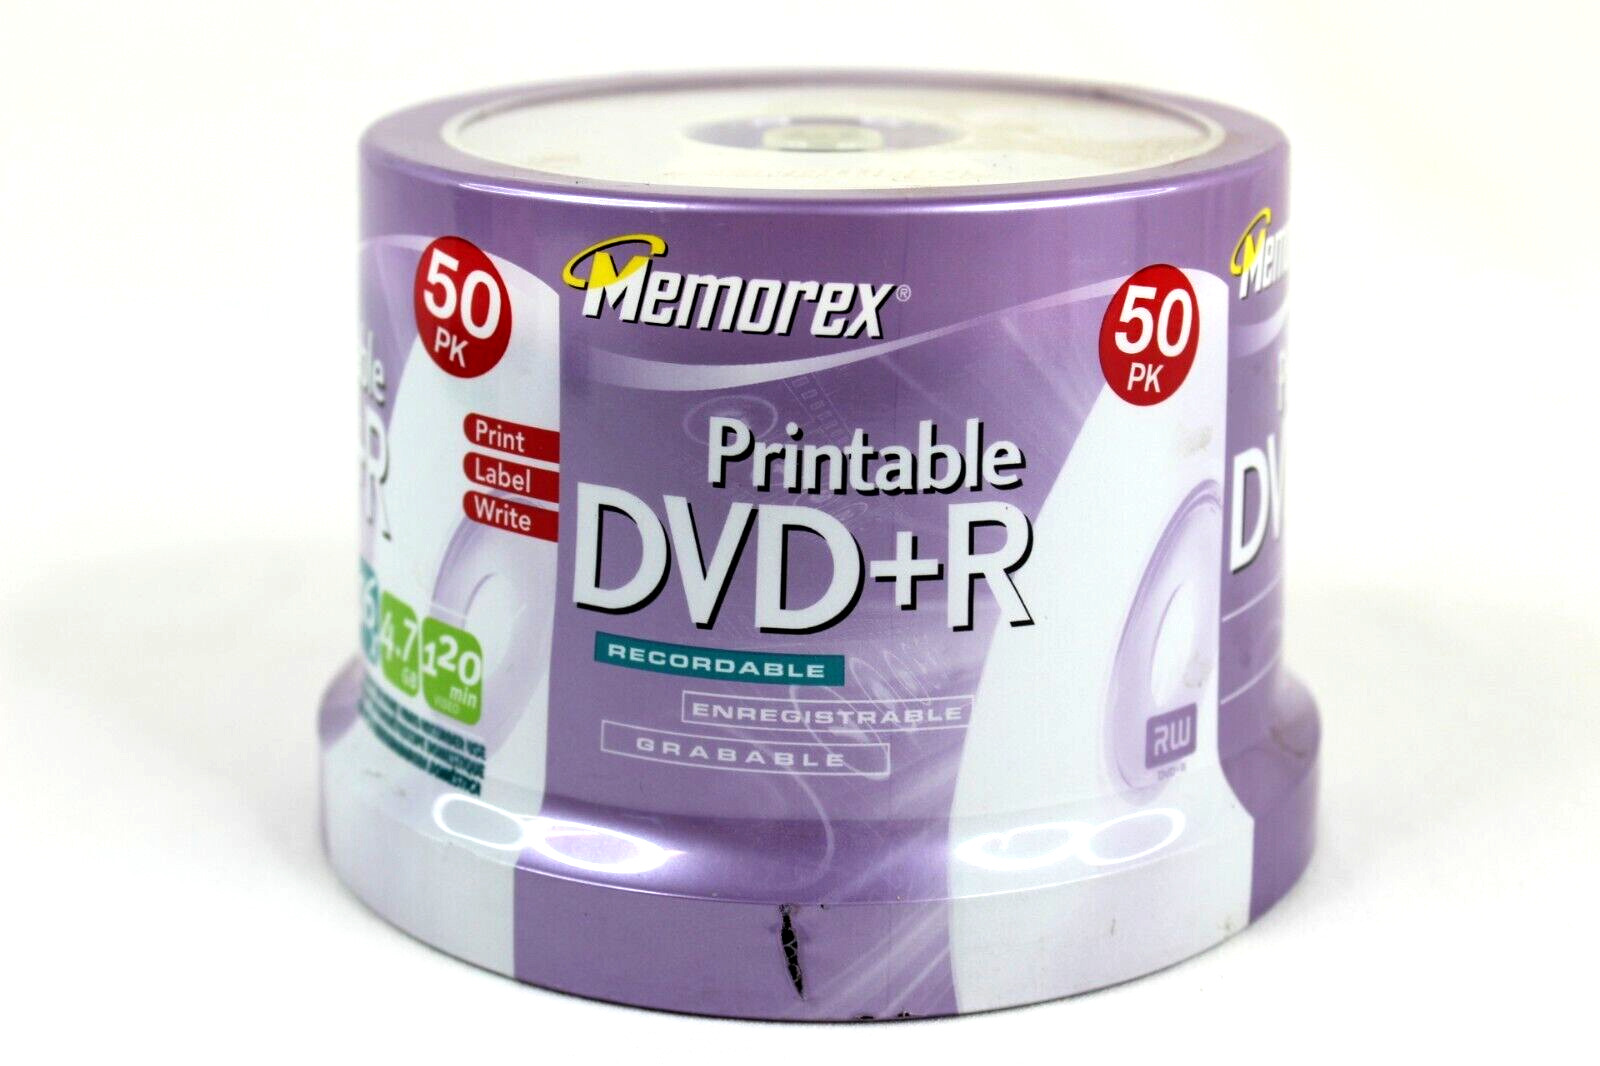 Memorex Printable DVD-R 50 Pack 16x 4.7GB 120 Minutes Spindle New and Sealed